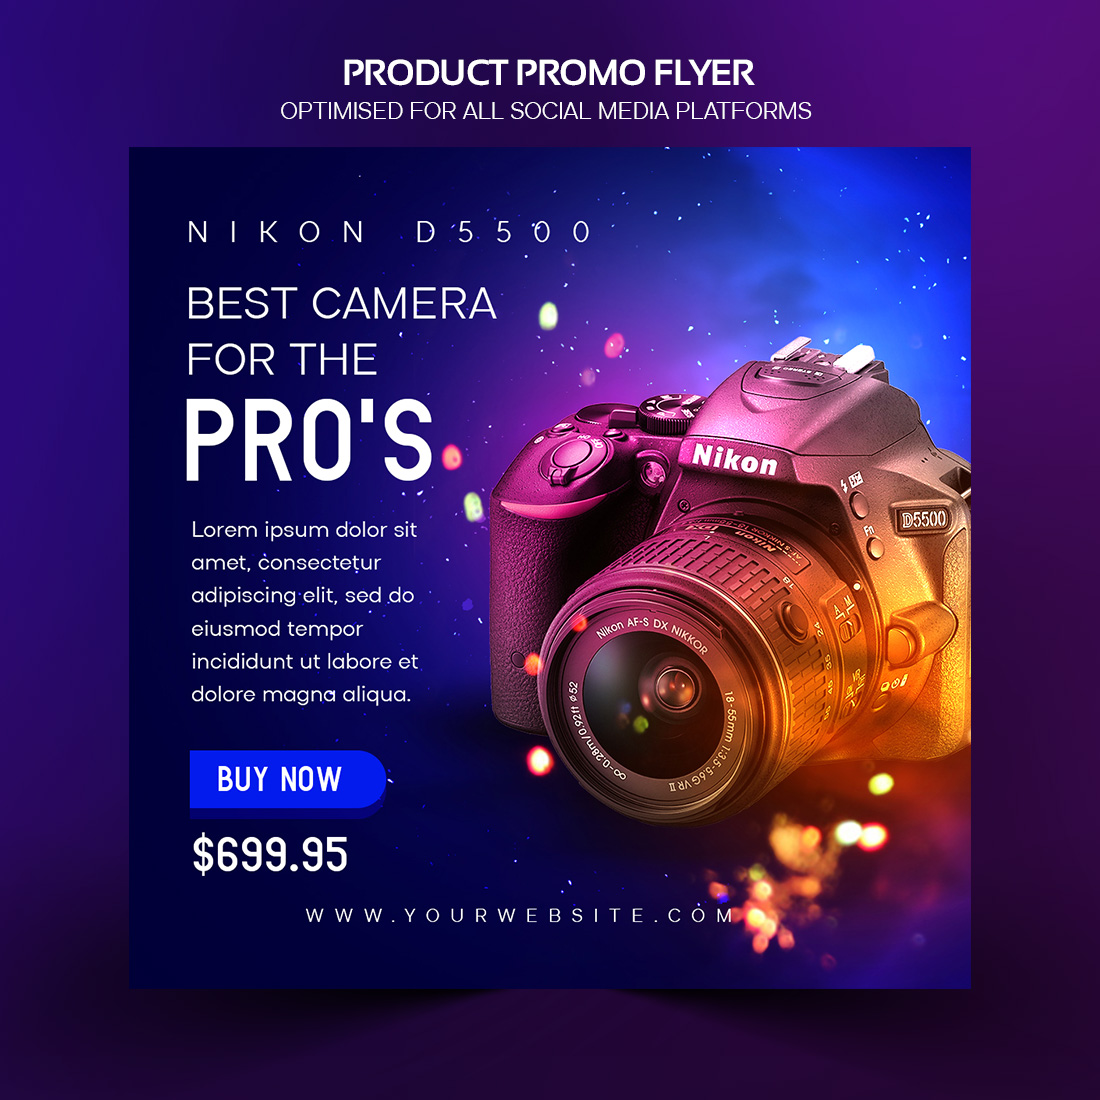 E- Commerce Product Sales Advertising Flyer Template cover image.